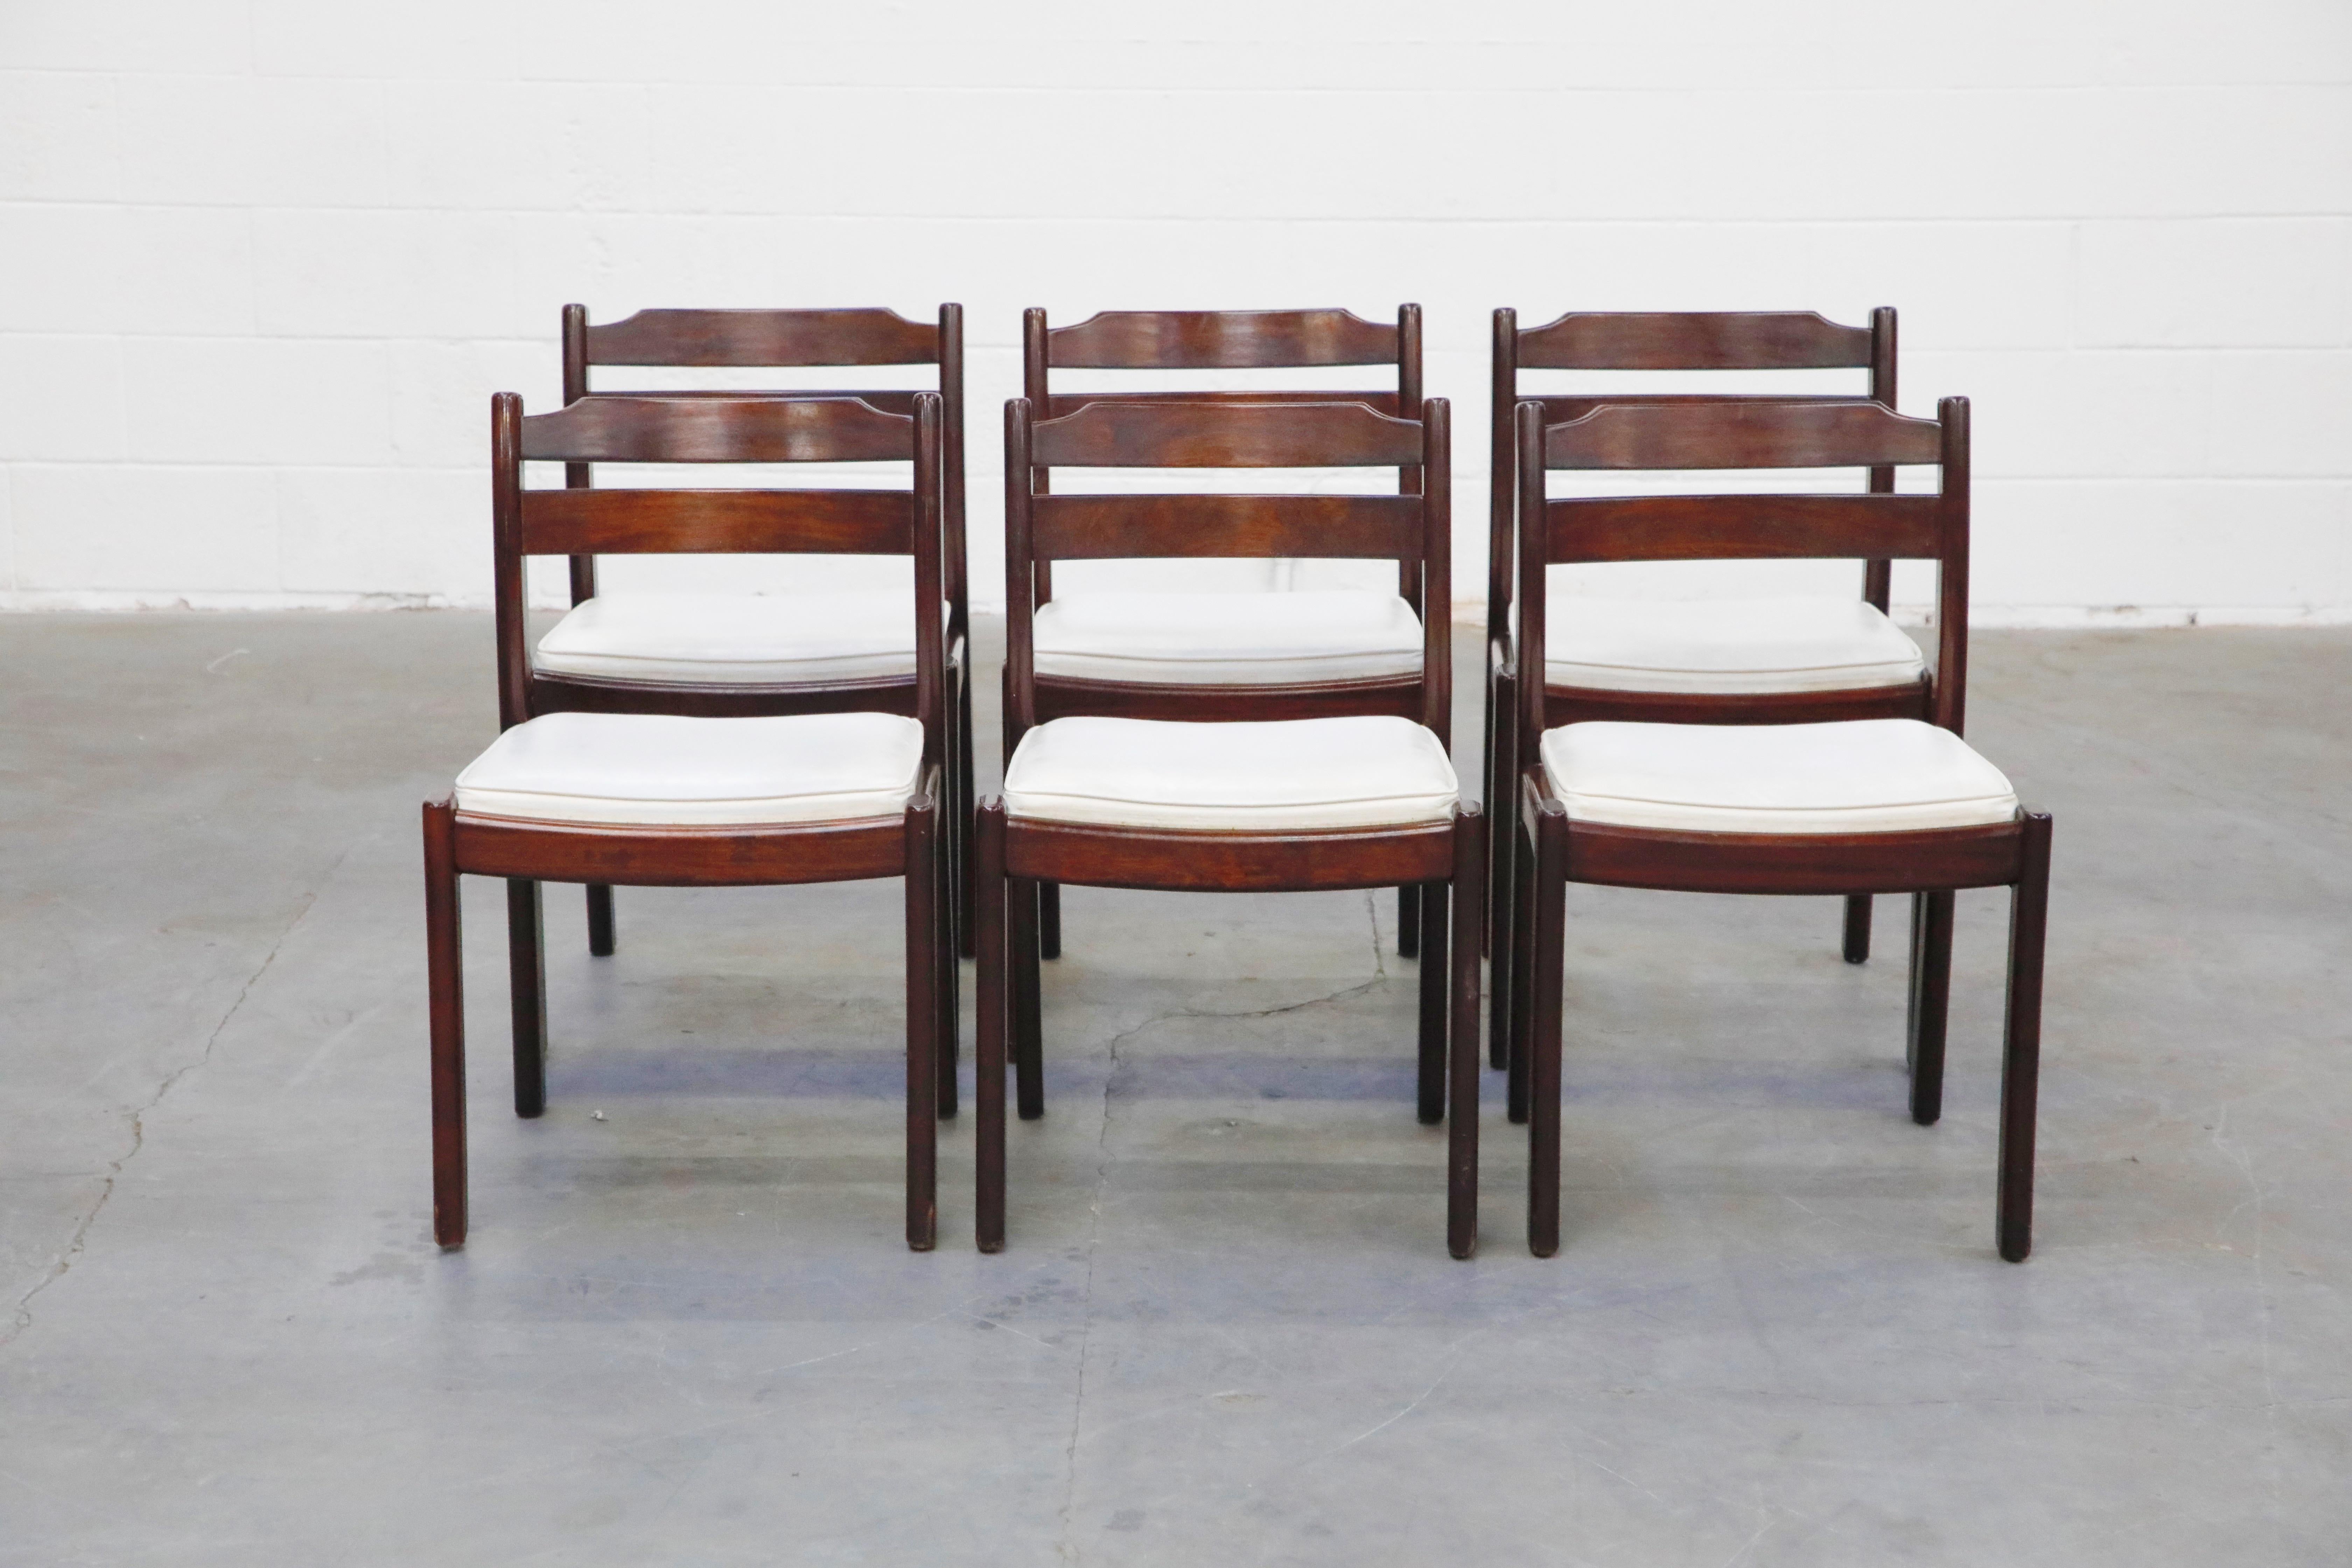 This lovely set of six (6) Danish Modern Rosewood dining chairs are by Dyrlund, circa 1960s, sculpted from Rosewood with white leatherette upholstery, these are a perfect option for interior designers and Mid-Century Modern enthusiasts. Signed